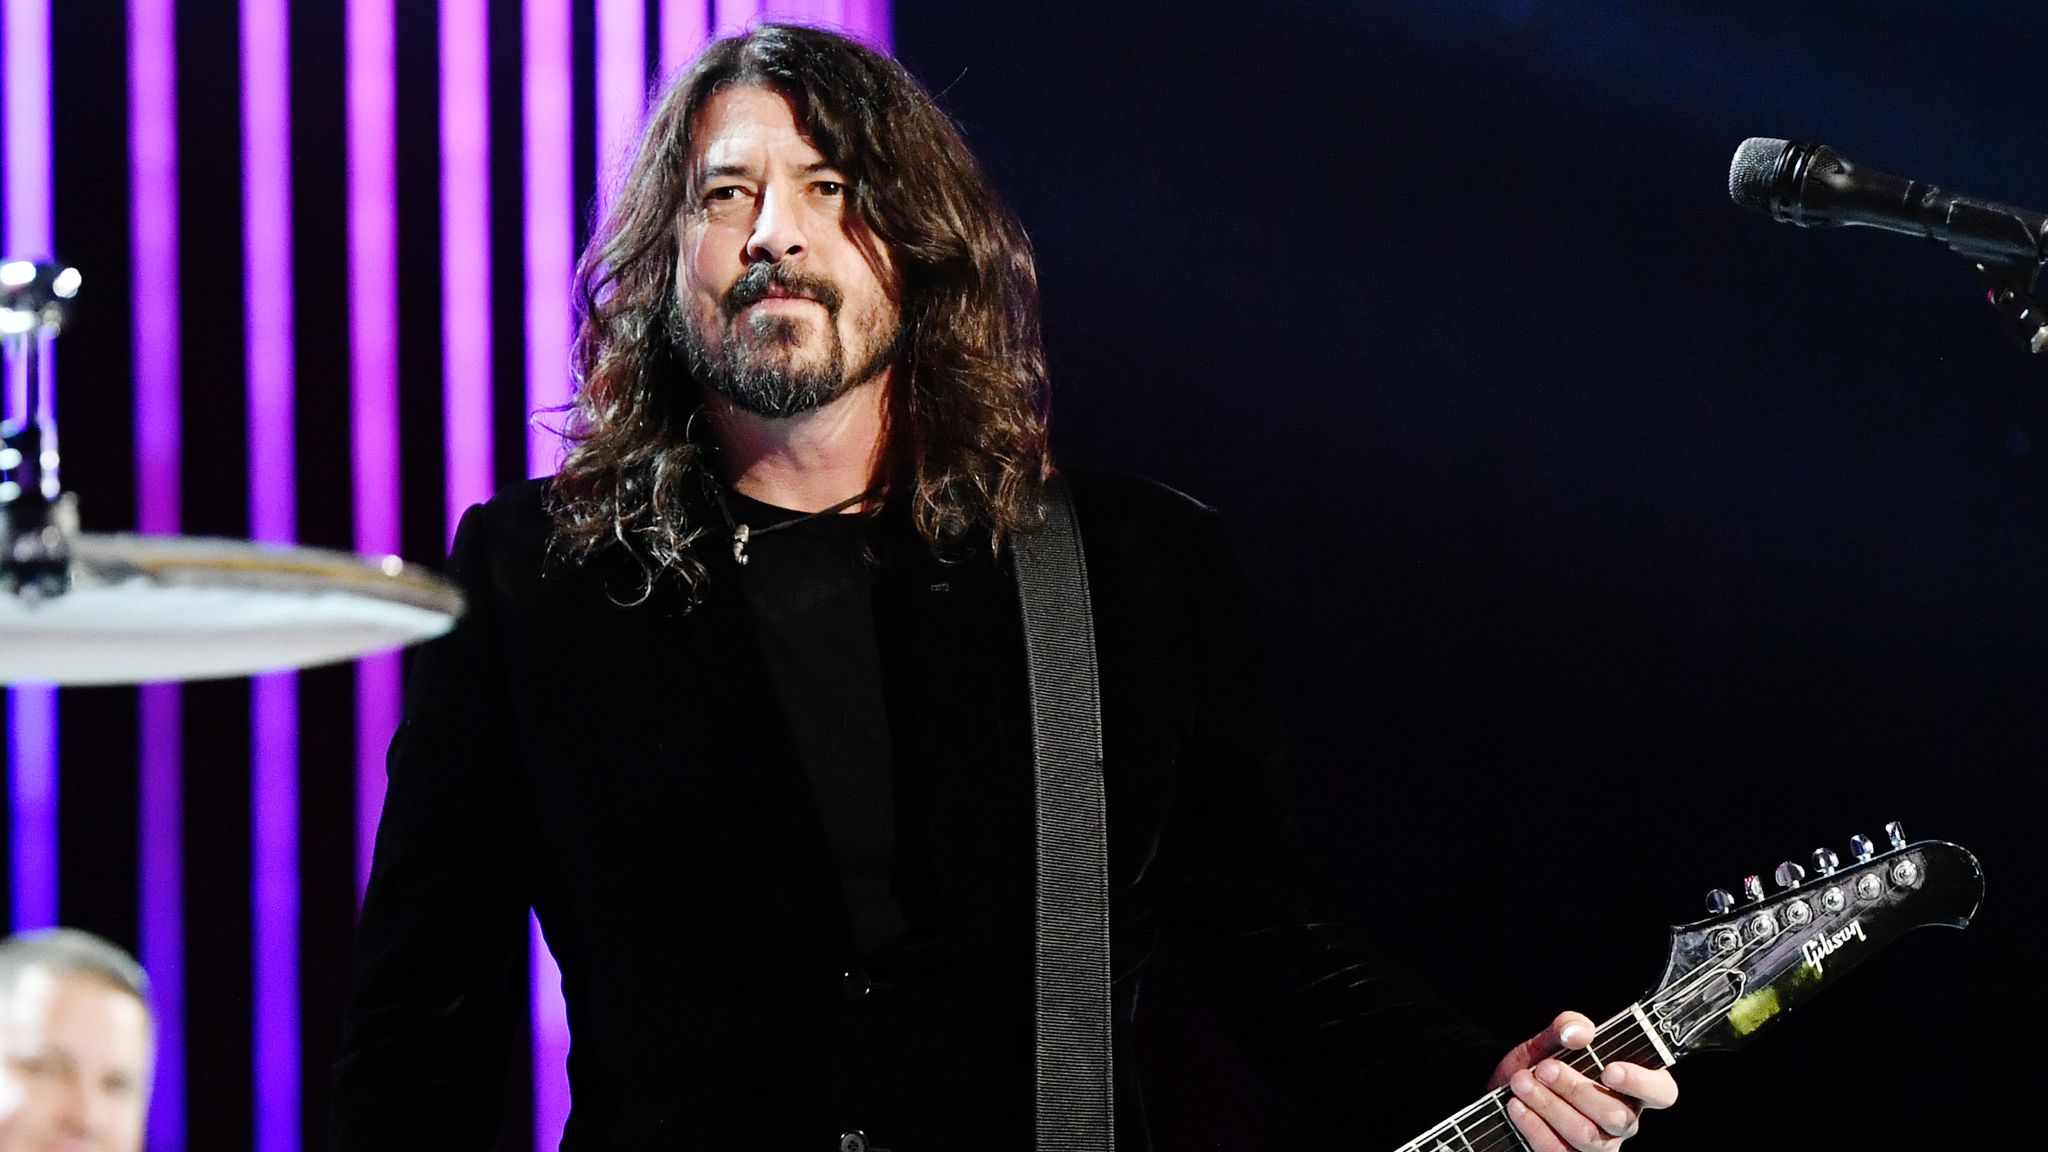 Coronavirus Foo Fighters Frontman Dave Grohl Criticises Move To Reopen Schools Saying Teachers Want To Teach Not Die Ents Arts News Sky News